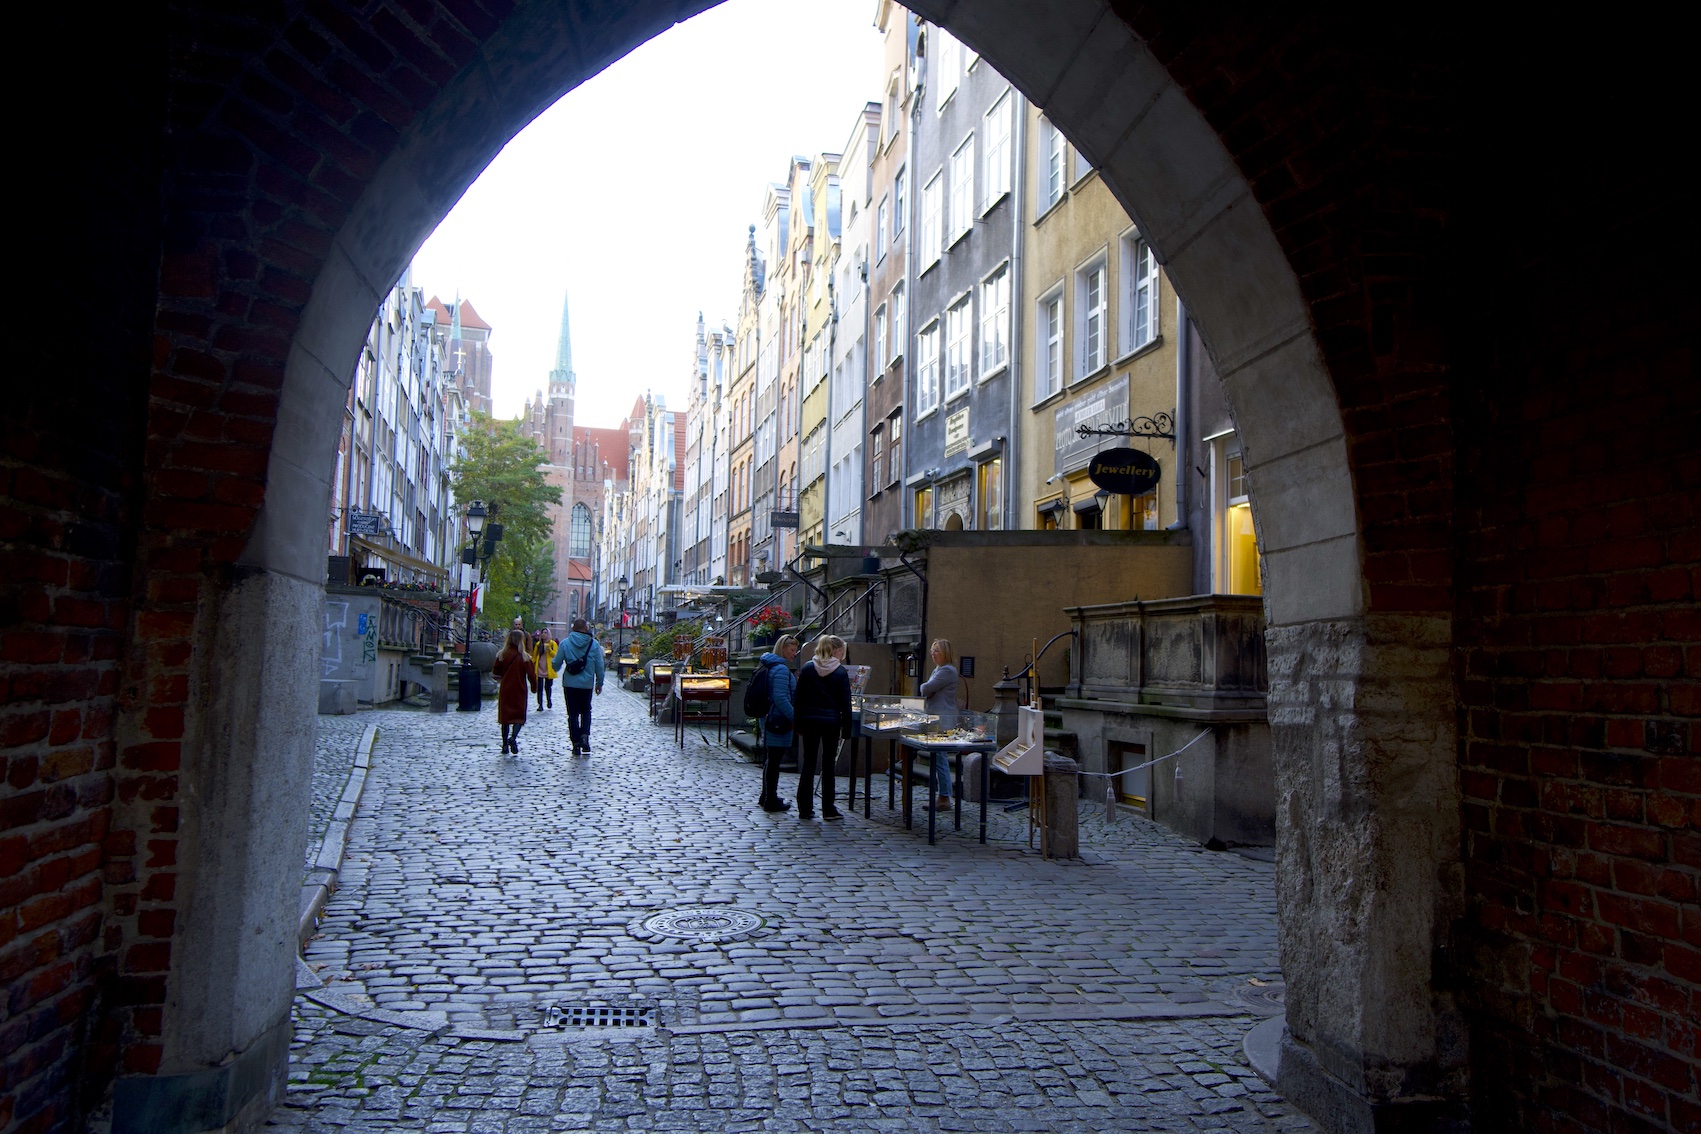 A view of Mariacka street from Mariacka gate on Gdansk